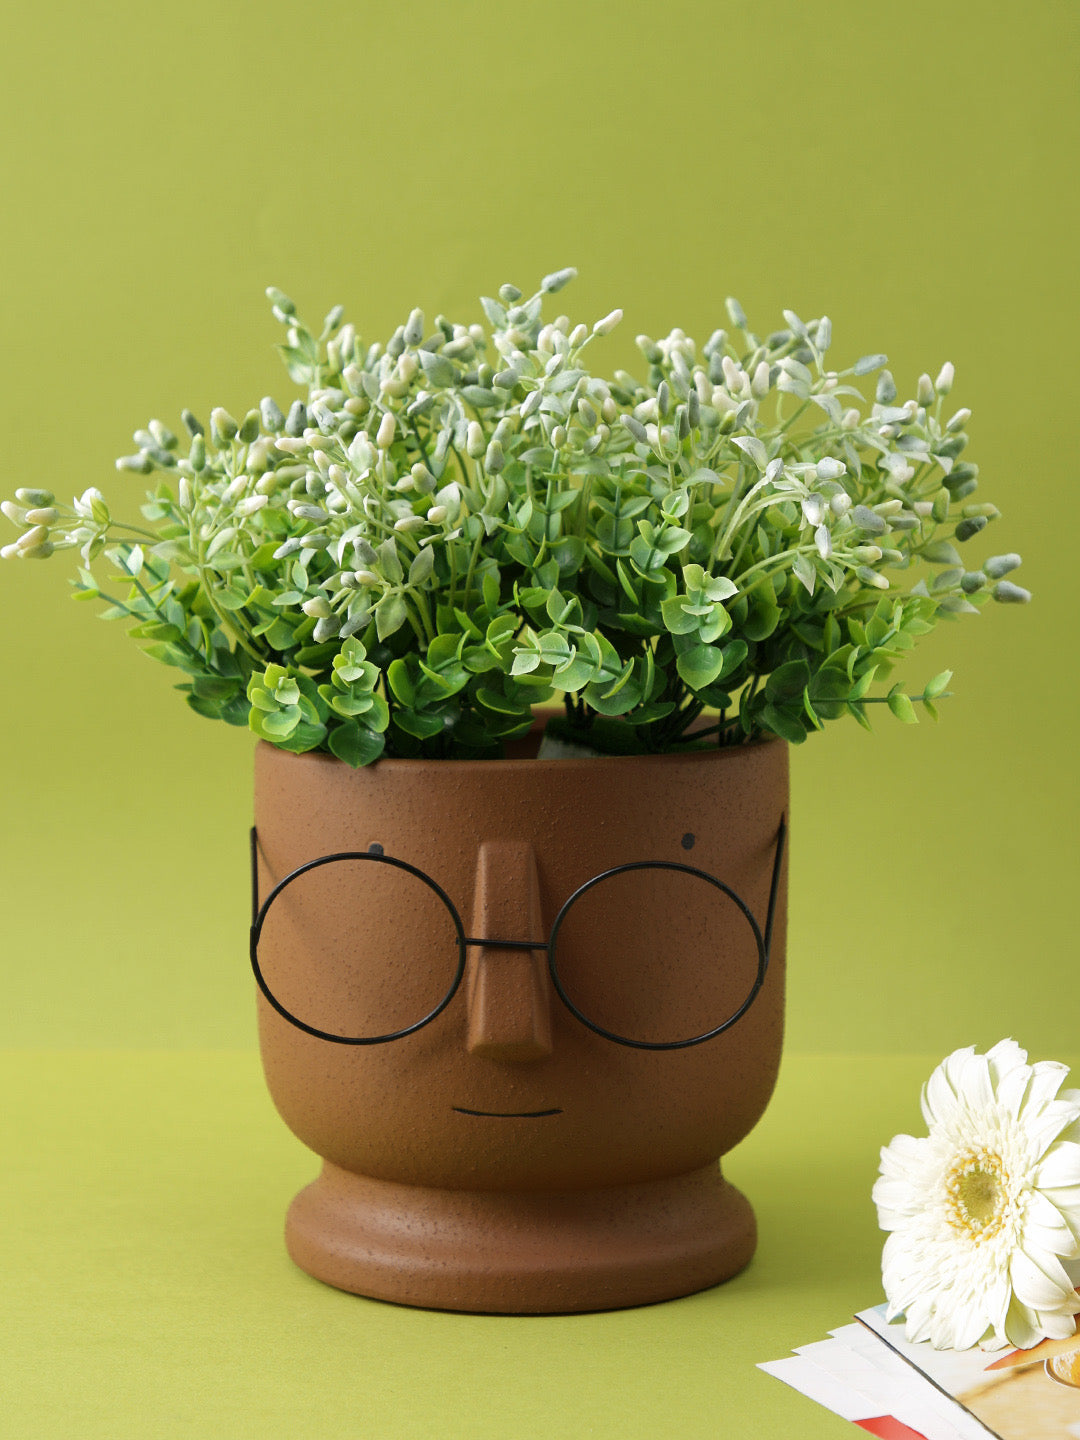 Cute Human Face Ceramic Brown Planter with Specs - Default Title (CHC22513BR)